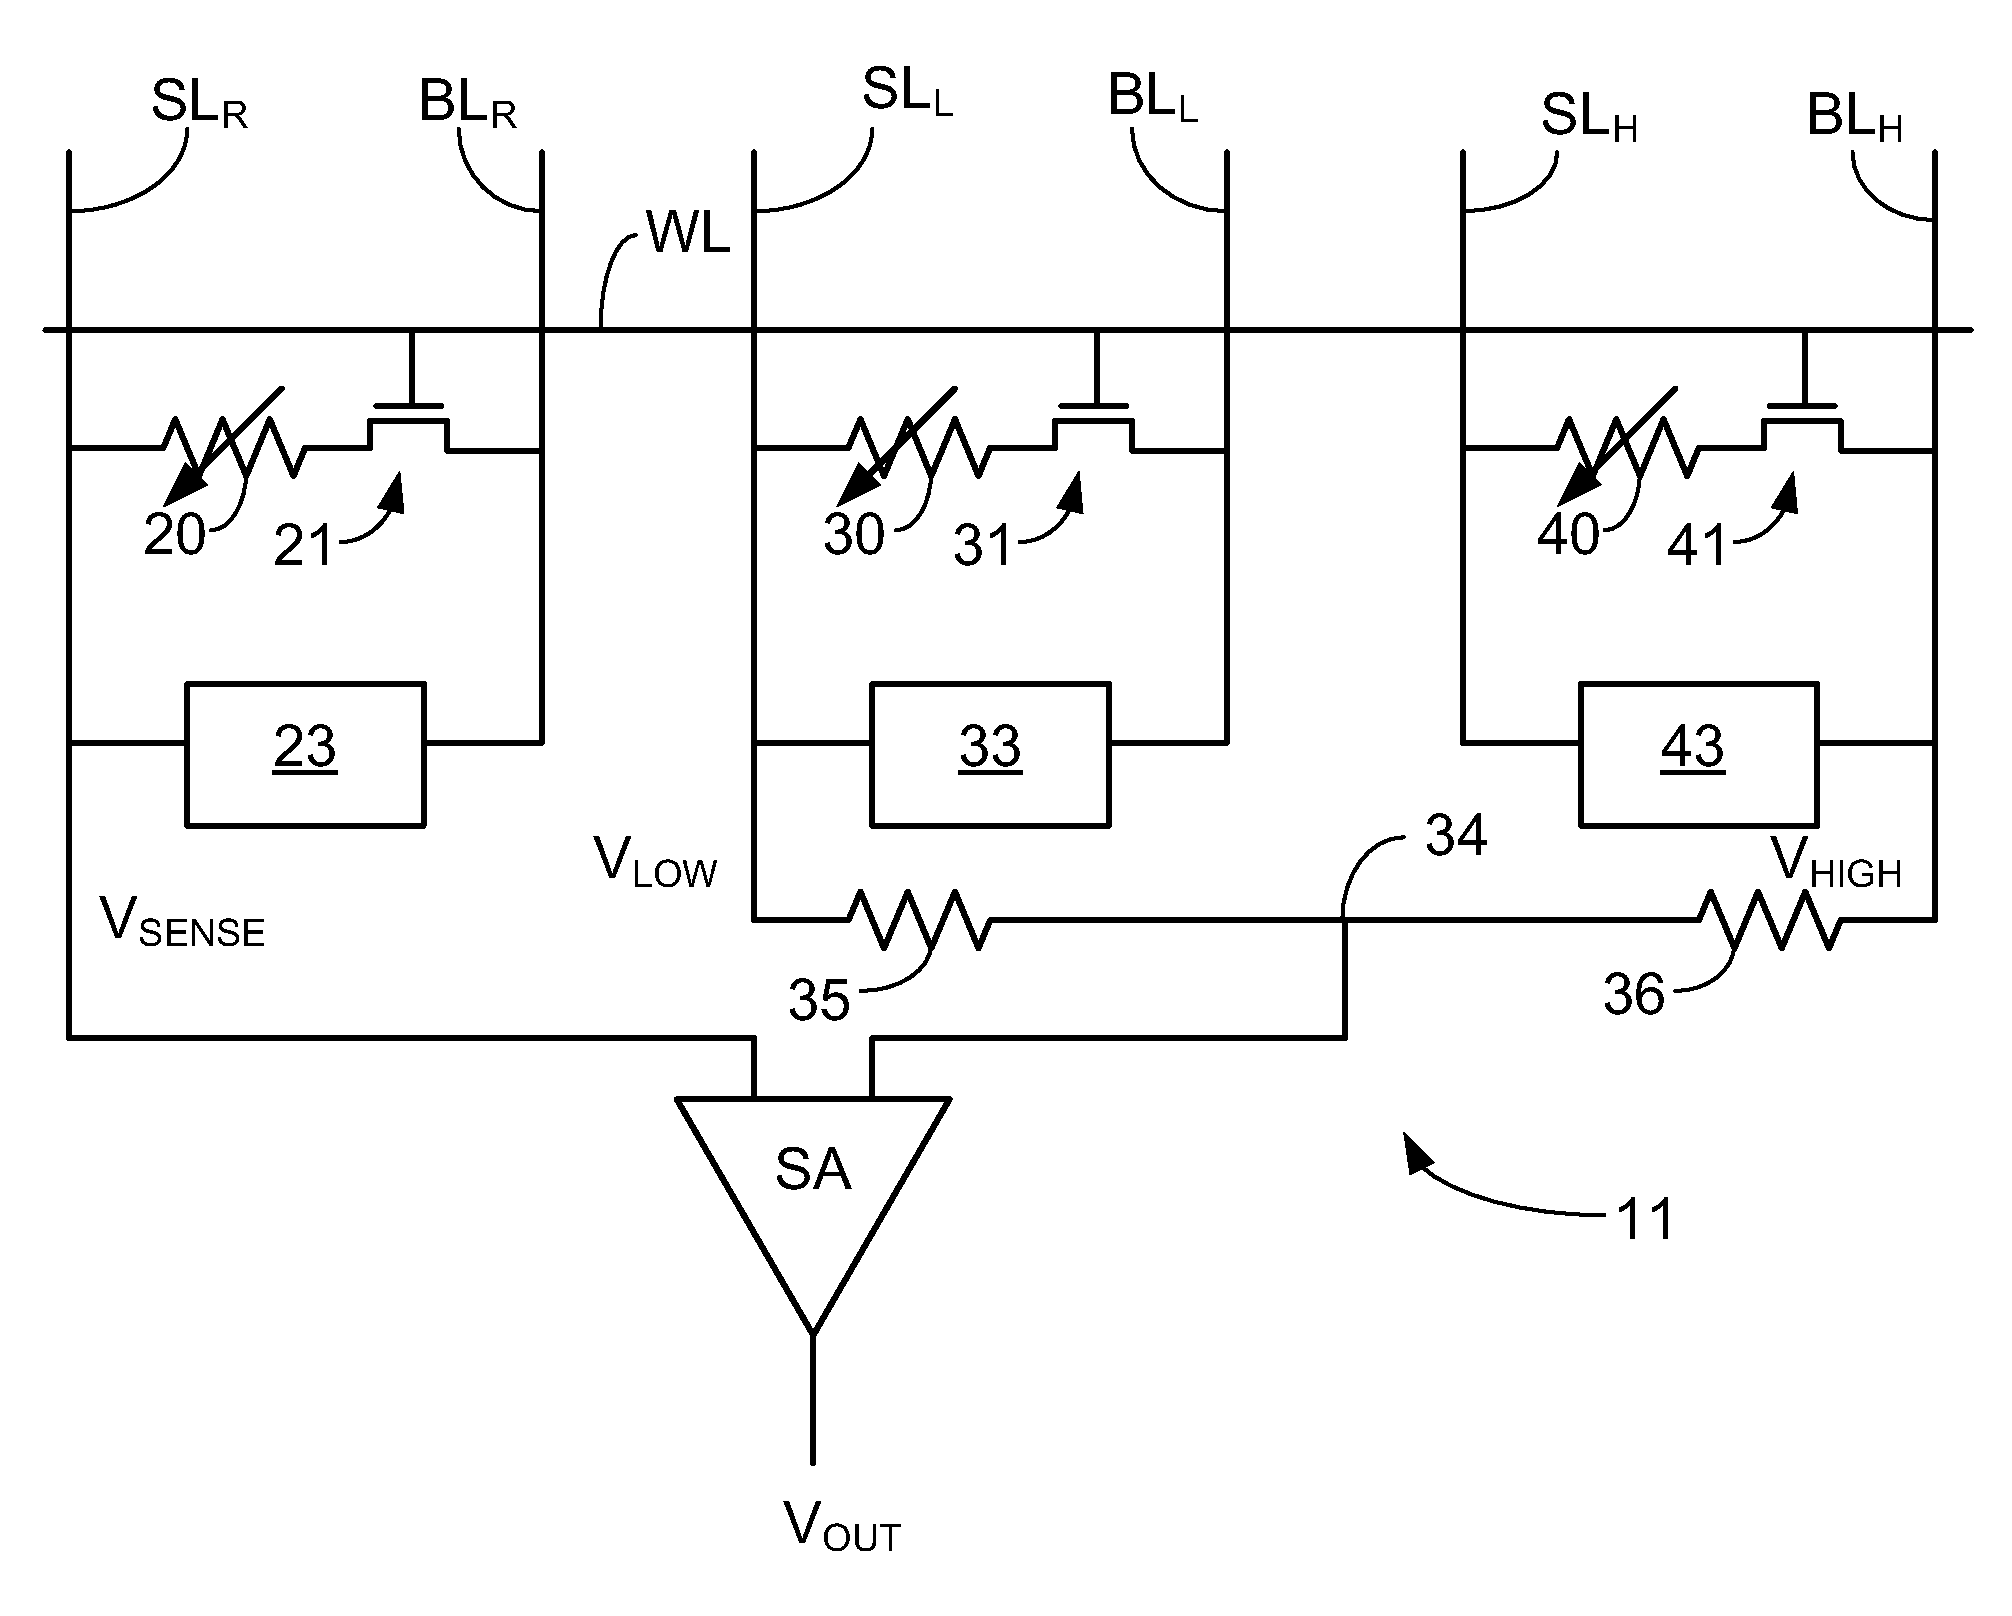 Memory array with read reference voltage cells